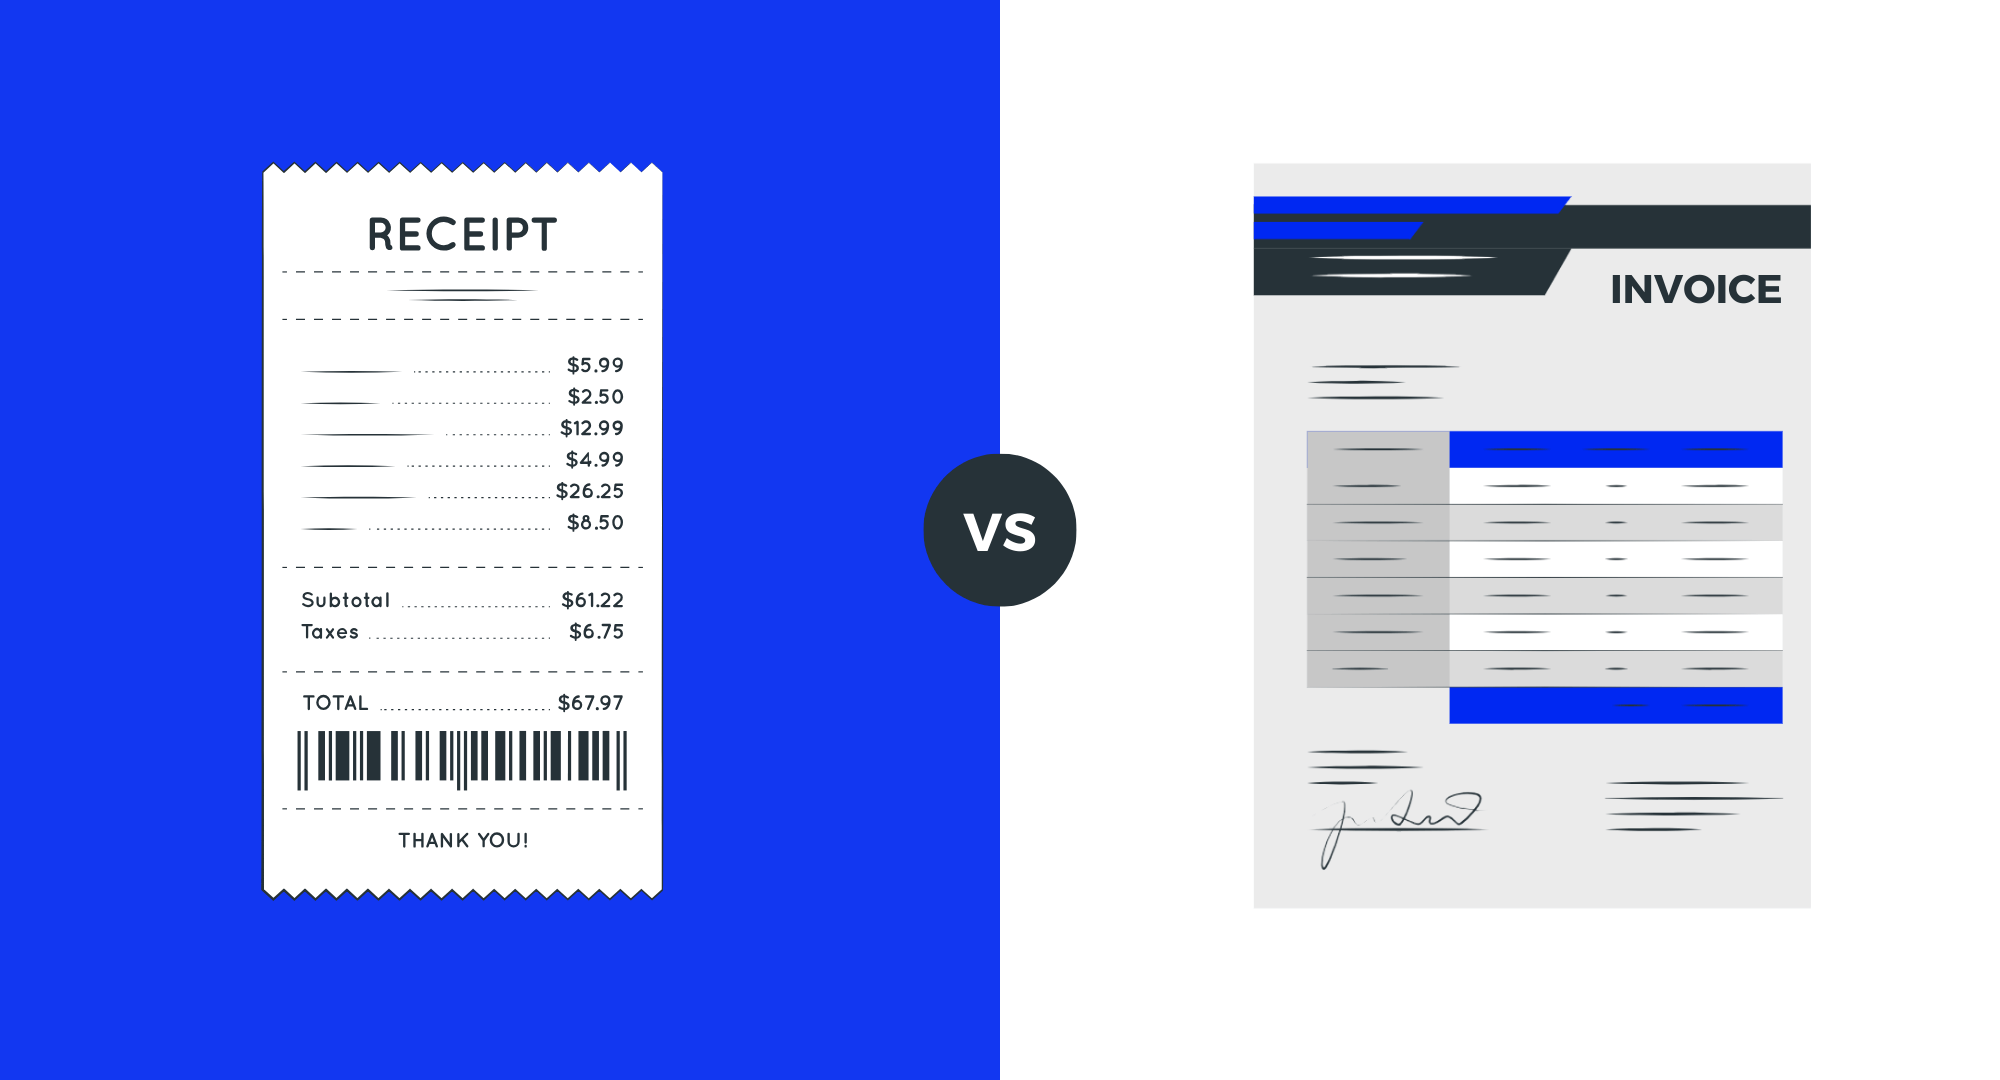 Invoice vs Receipt what is the difference